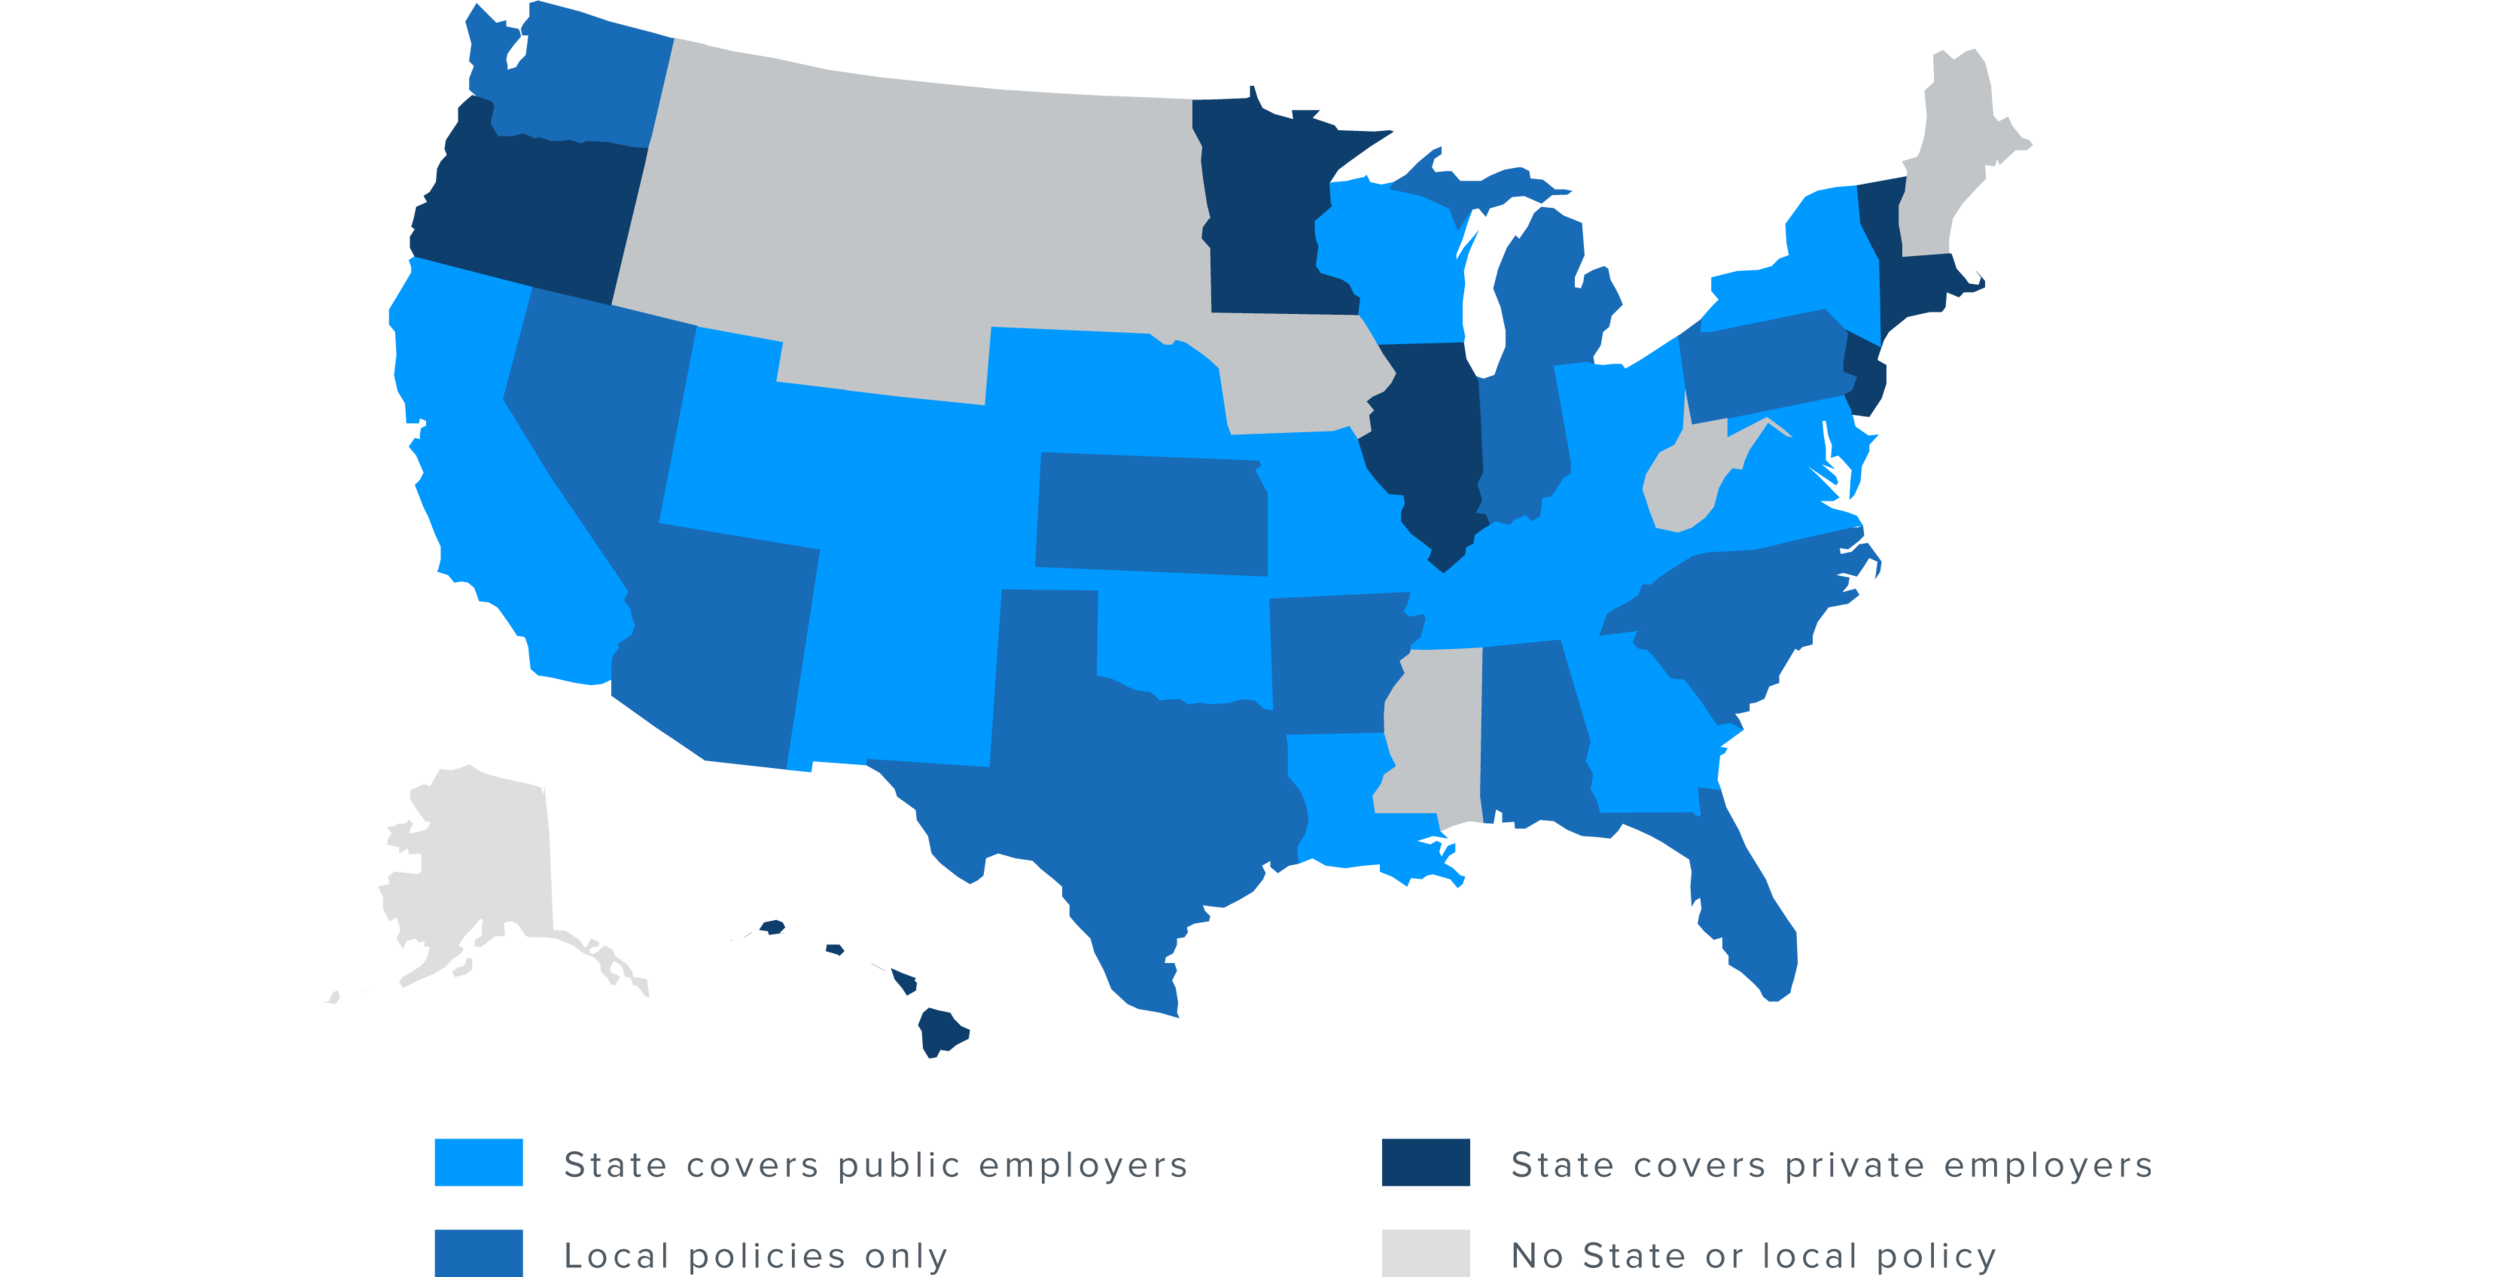 (City and state data compiled by The National Employment Law Program.)